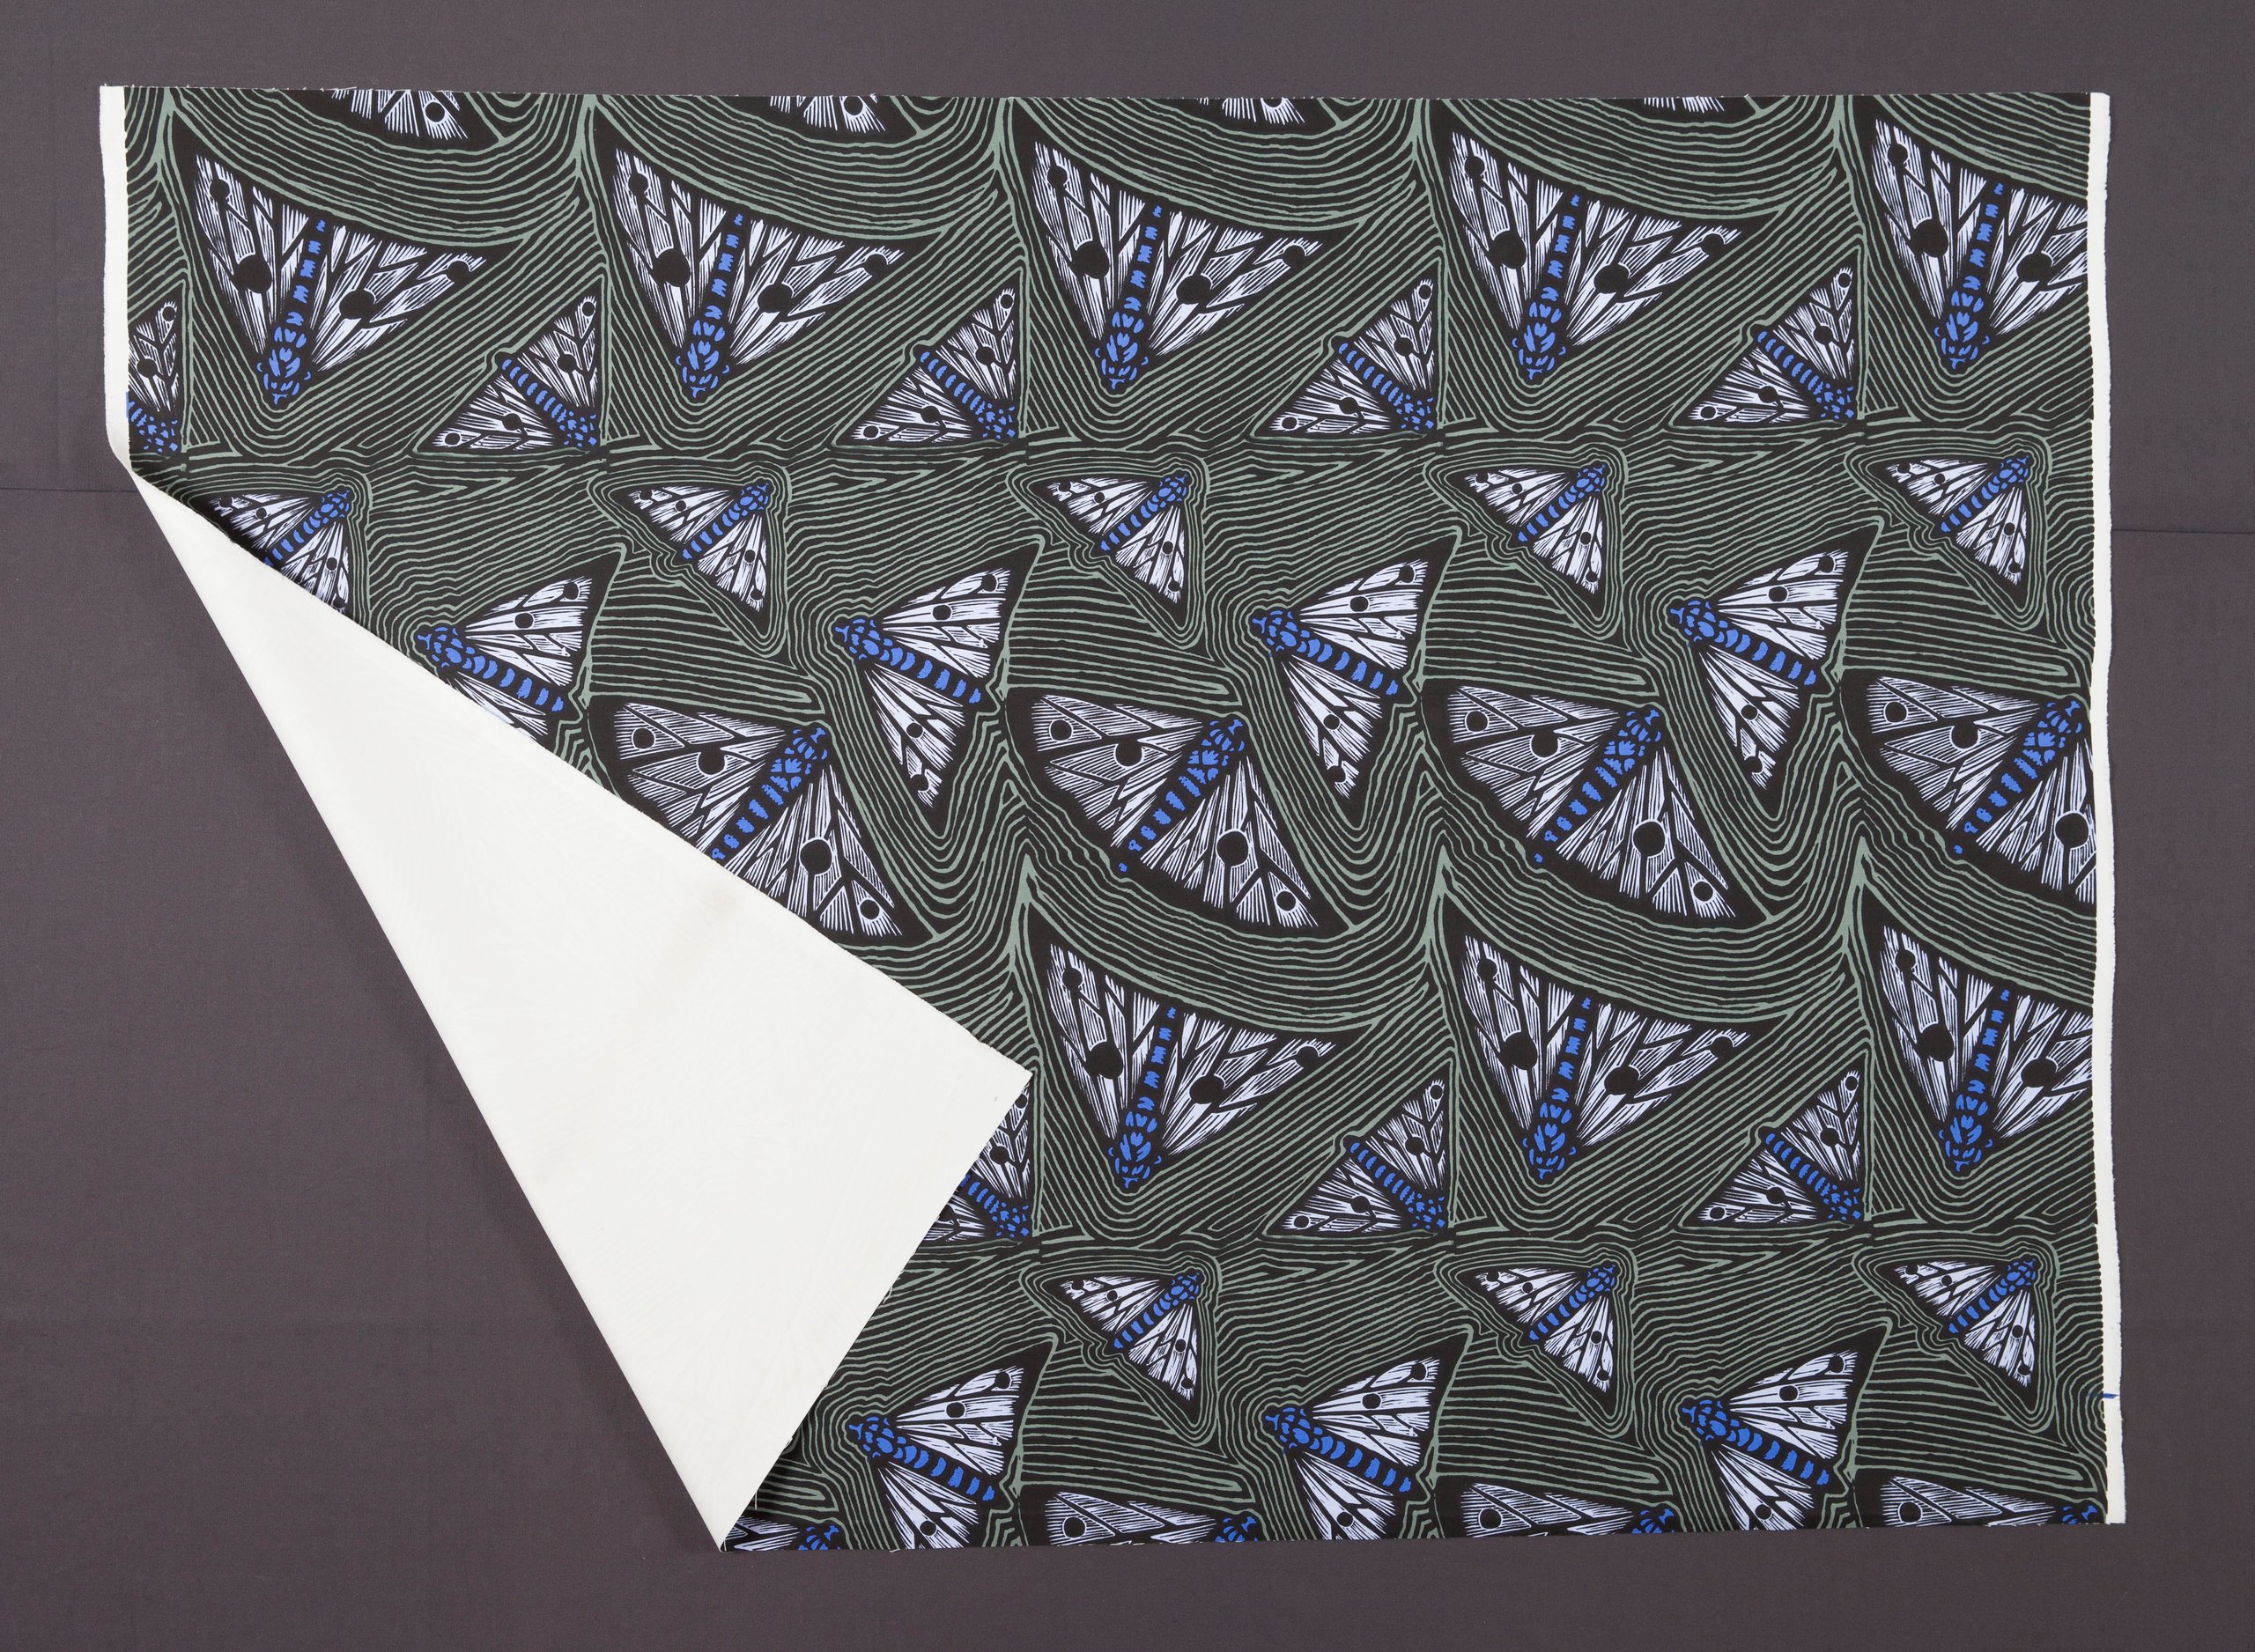 'Bogong Moth' textile designed by Bruce Goold for Mambo